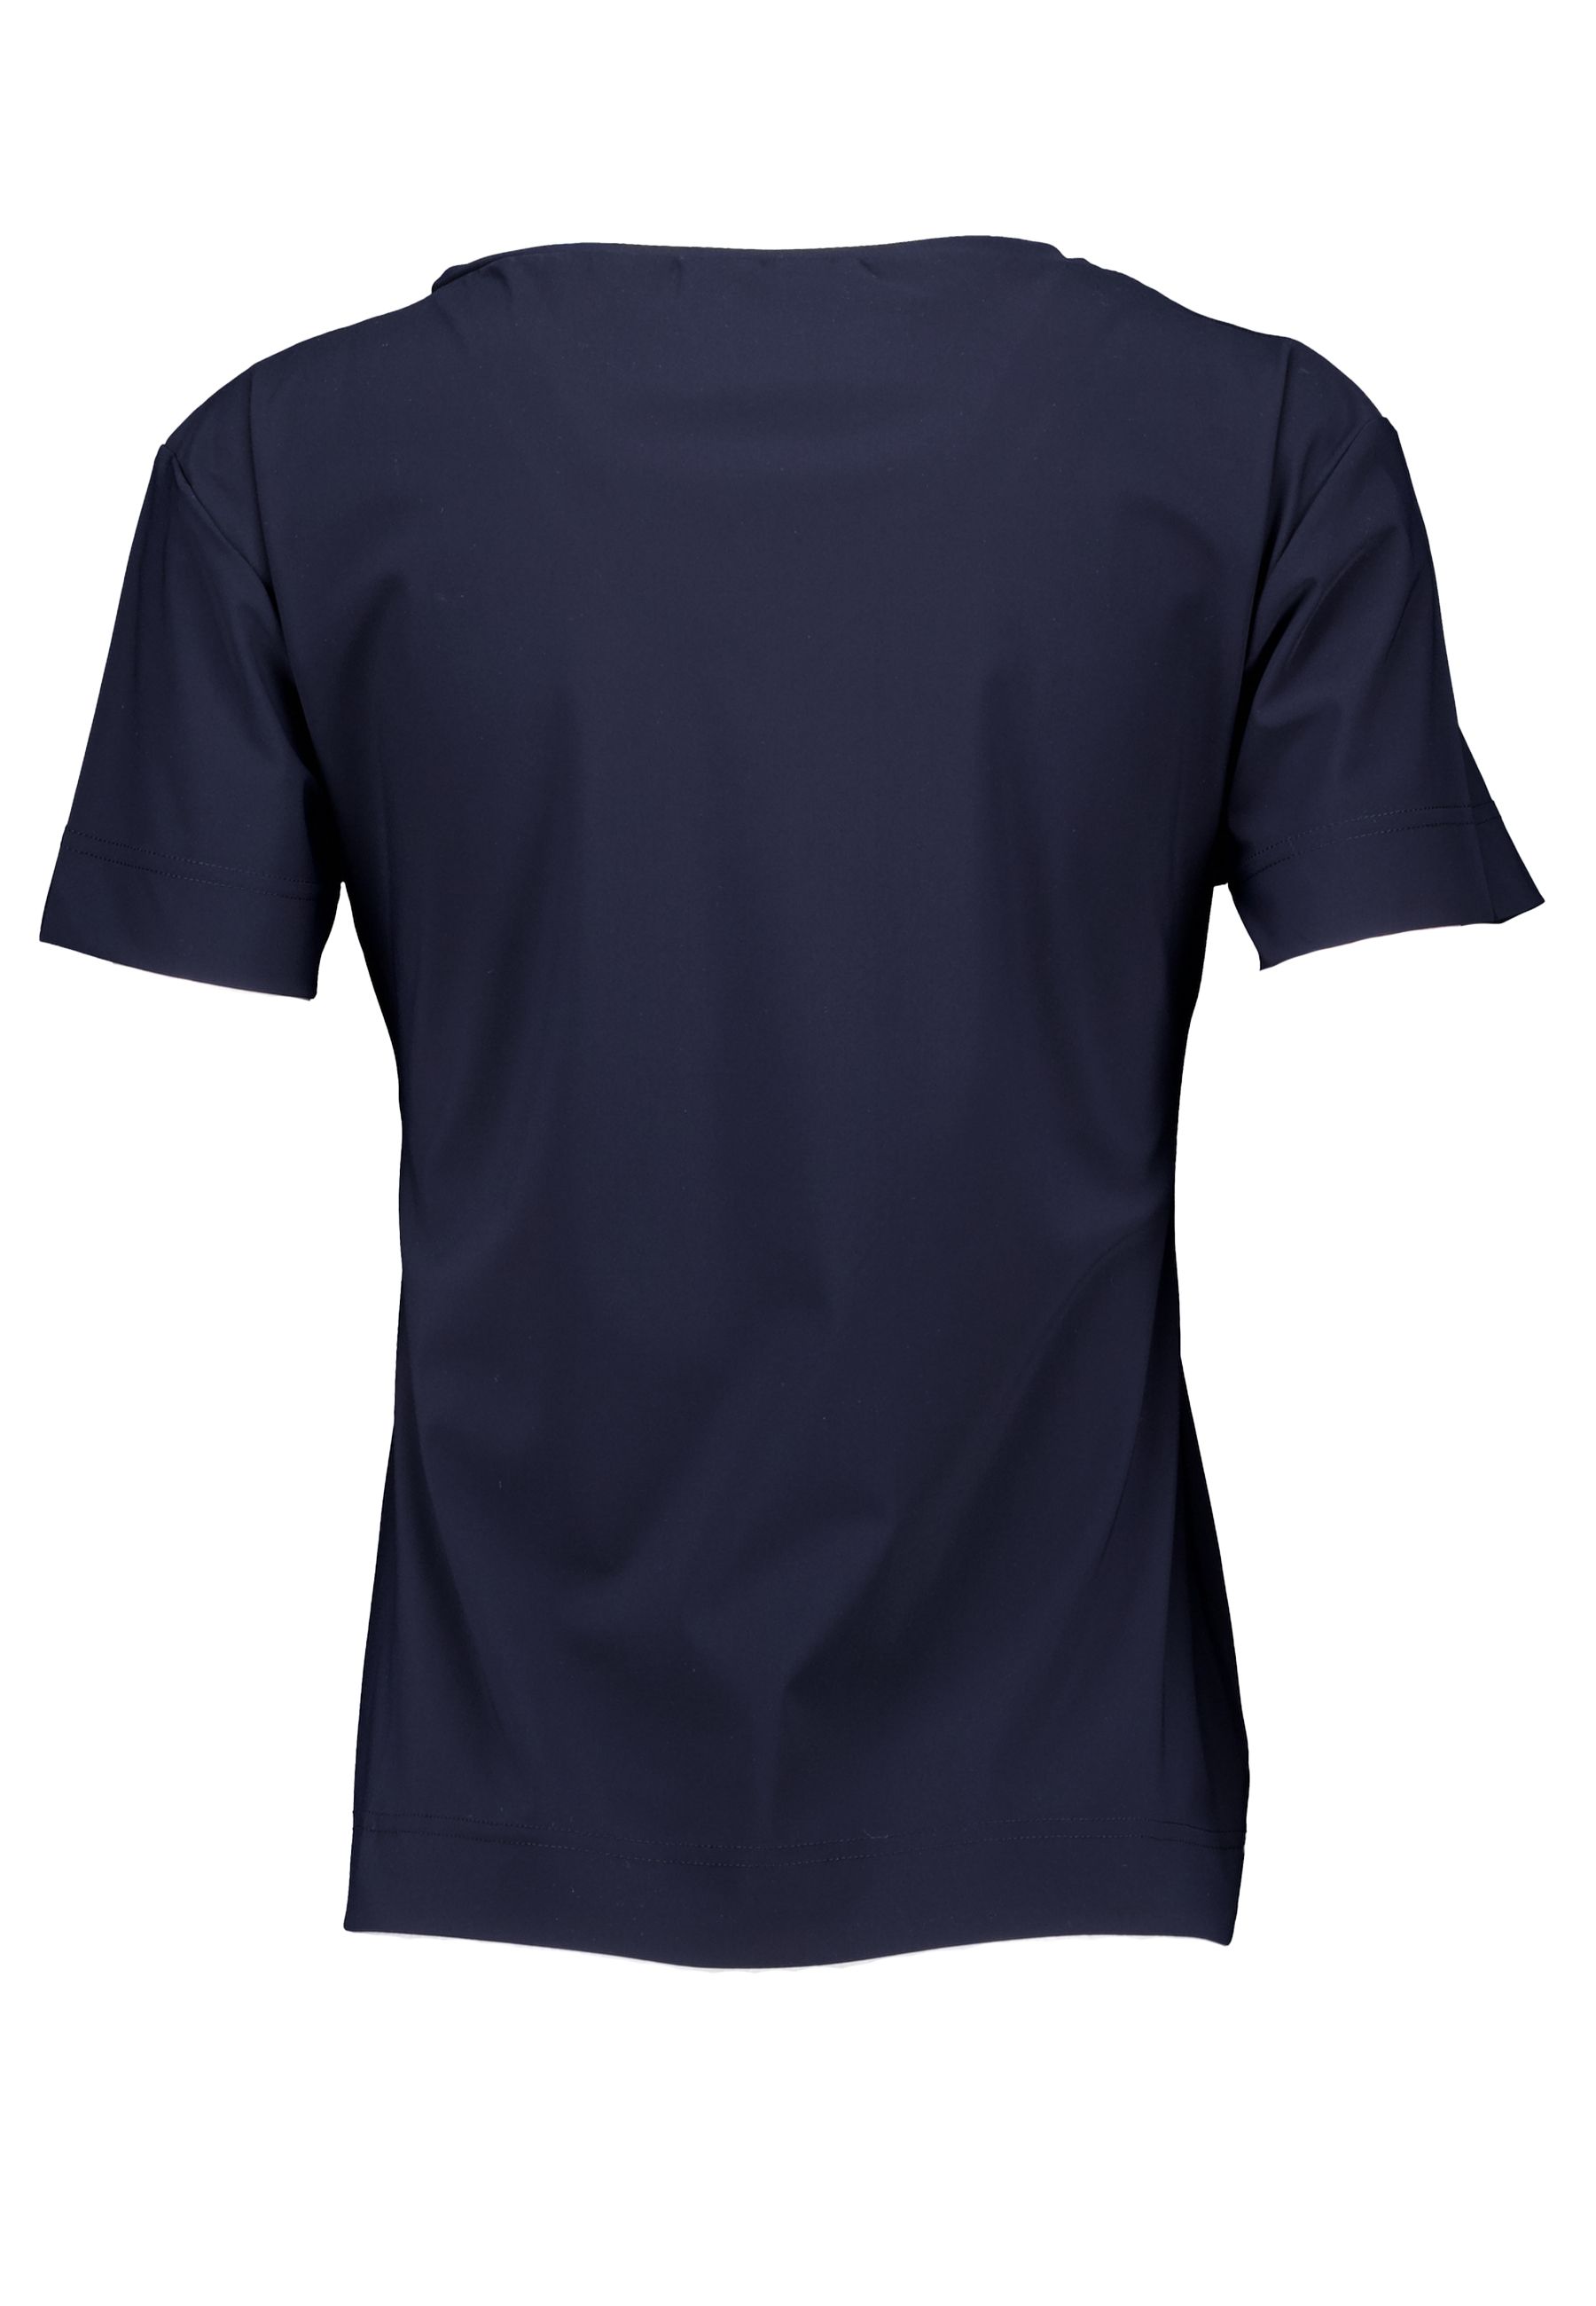 Roller T-shirts Donkerblauw 94783